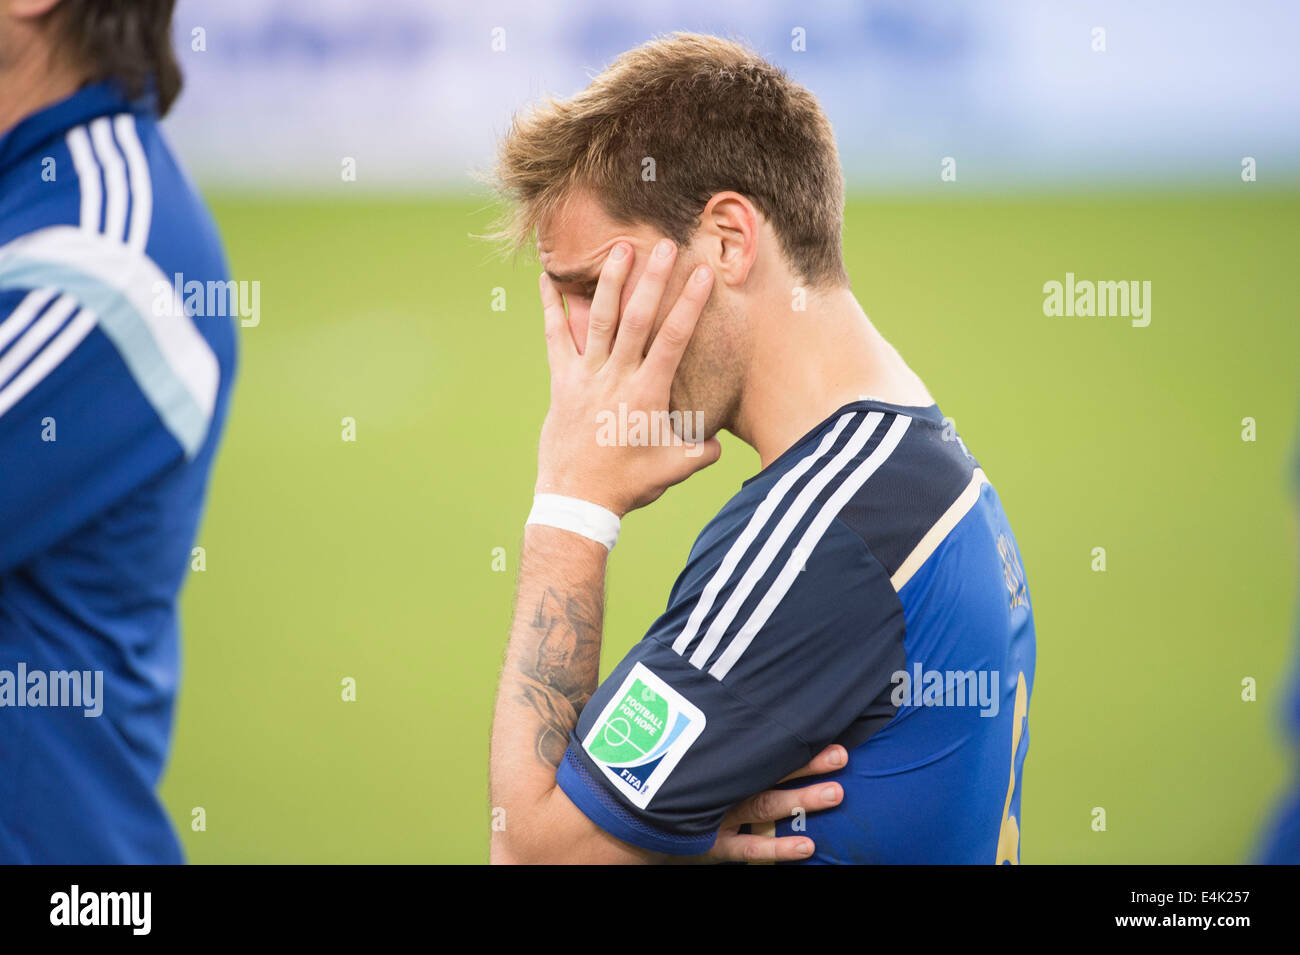 Rio de Janeiro, Brazil. 13th July, 2014. Lucas Biglia (ARG) Football/Soccer : Lucas Biglia of Argentina looks dejected after the FIFA World Cup Brazil 2014 Final match between Germany 1-0 Argentina at the Maracana stadium in Rio de Janeiro, Brazil . Credit:  Maurizio Borsari/AFLO/Alamy Live News Stock Photo